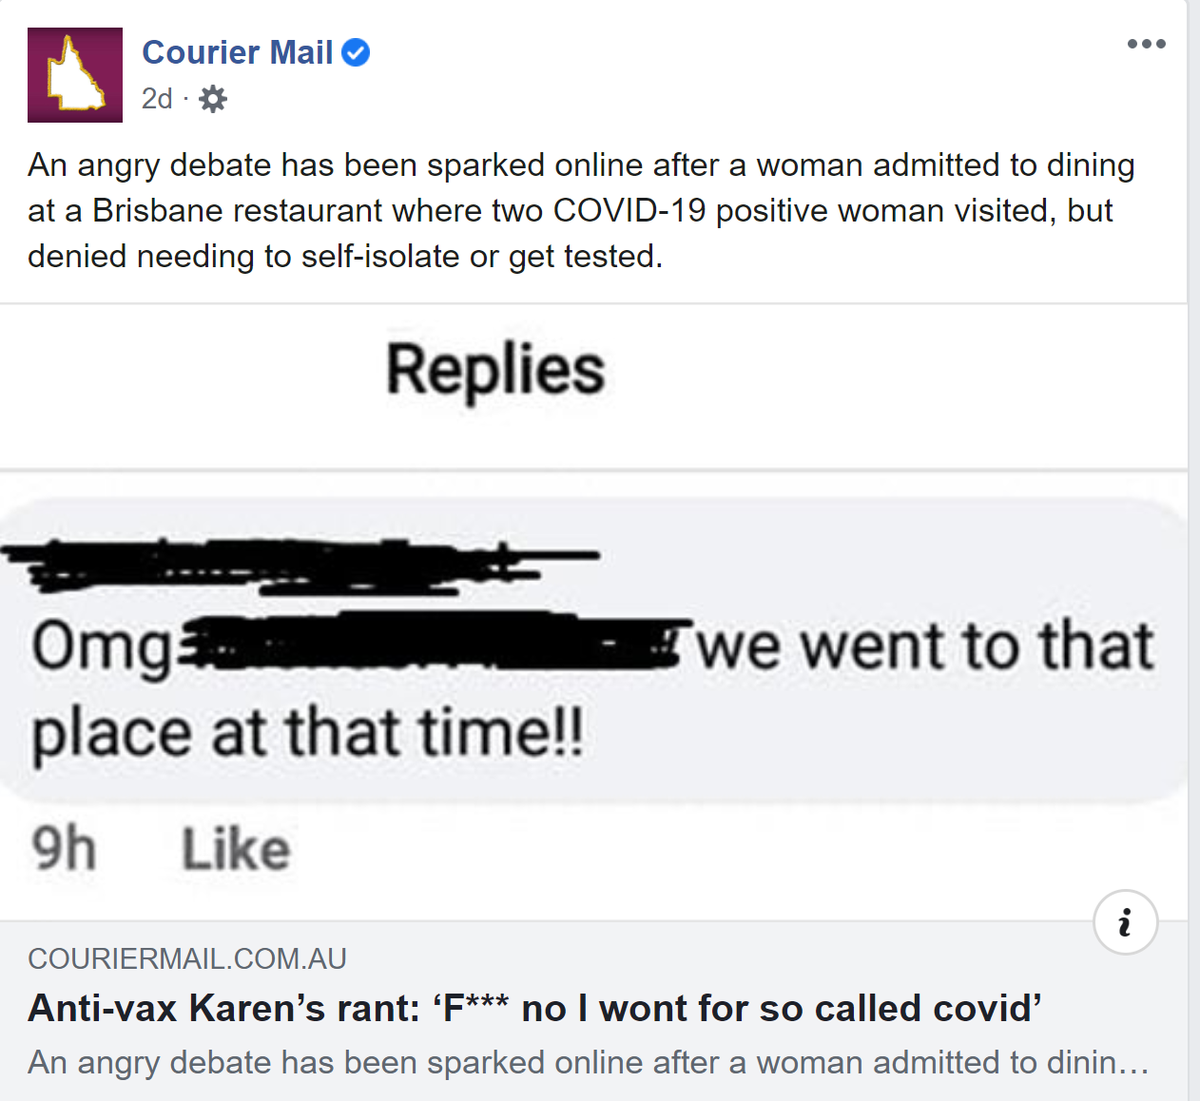 The  @Couriermail's story on this person who is refusing to get tested after dining in the same place as a positive case very kindly erases the name of the person in their post. Great to see that they're worried about her safety and wellbeing. It is framed as a 'debate'